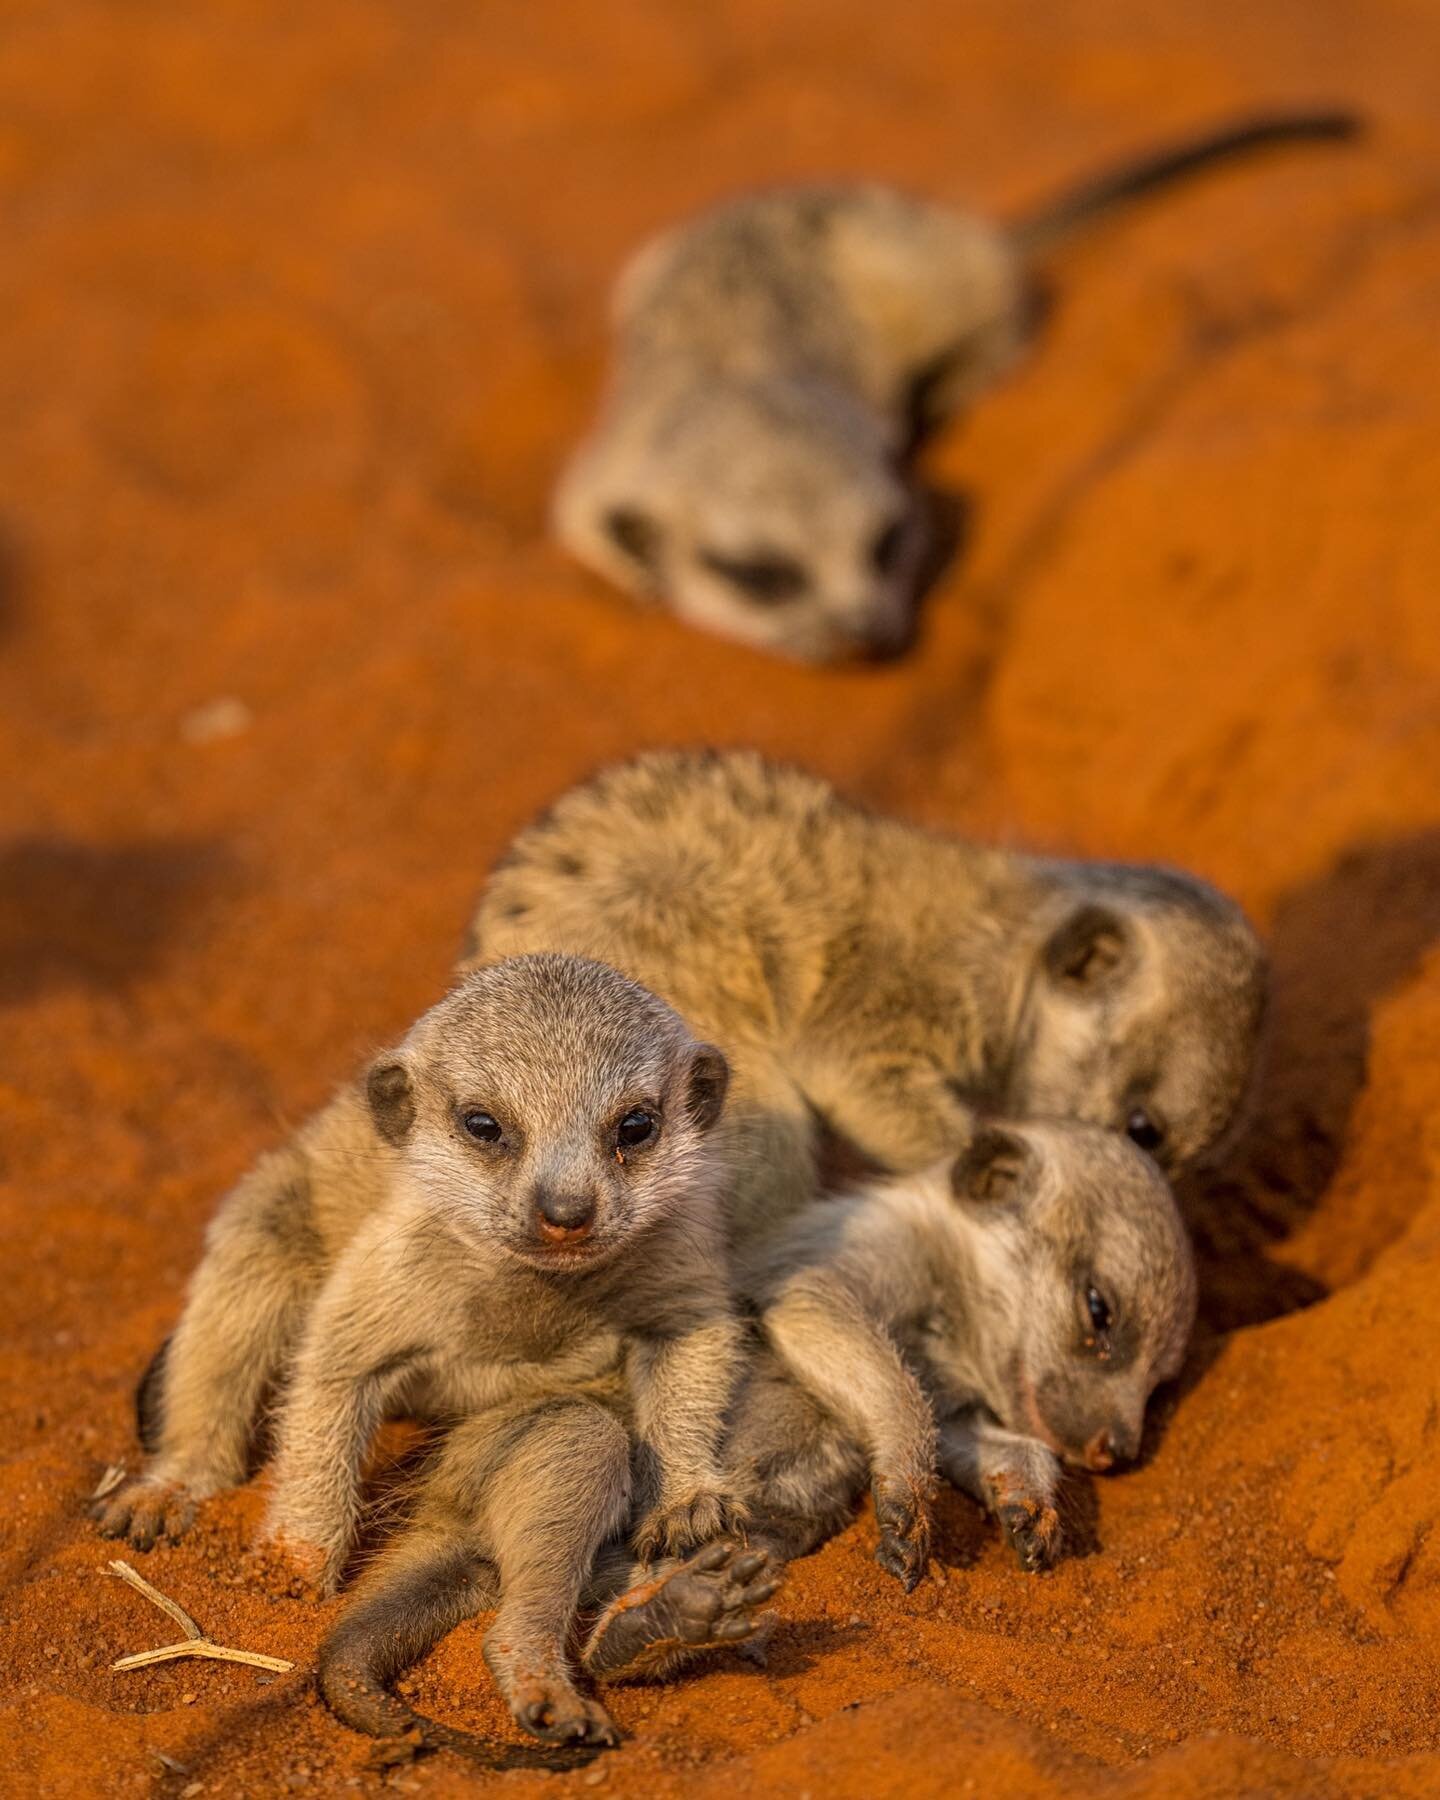 I feel like my feed needed some baby meerkats this morning.